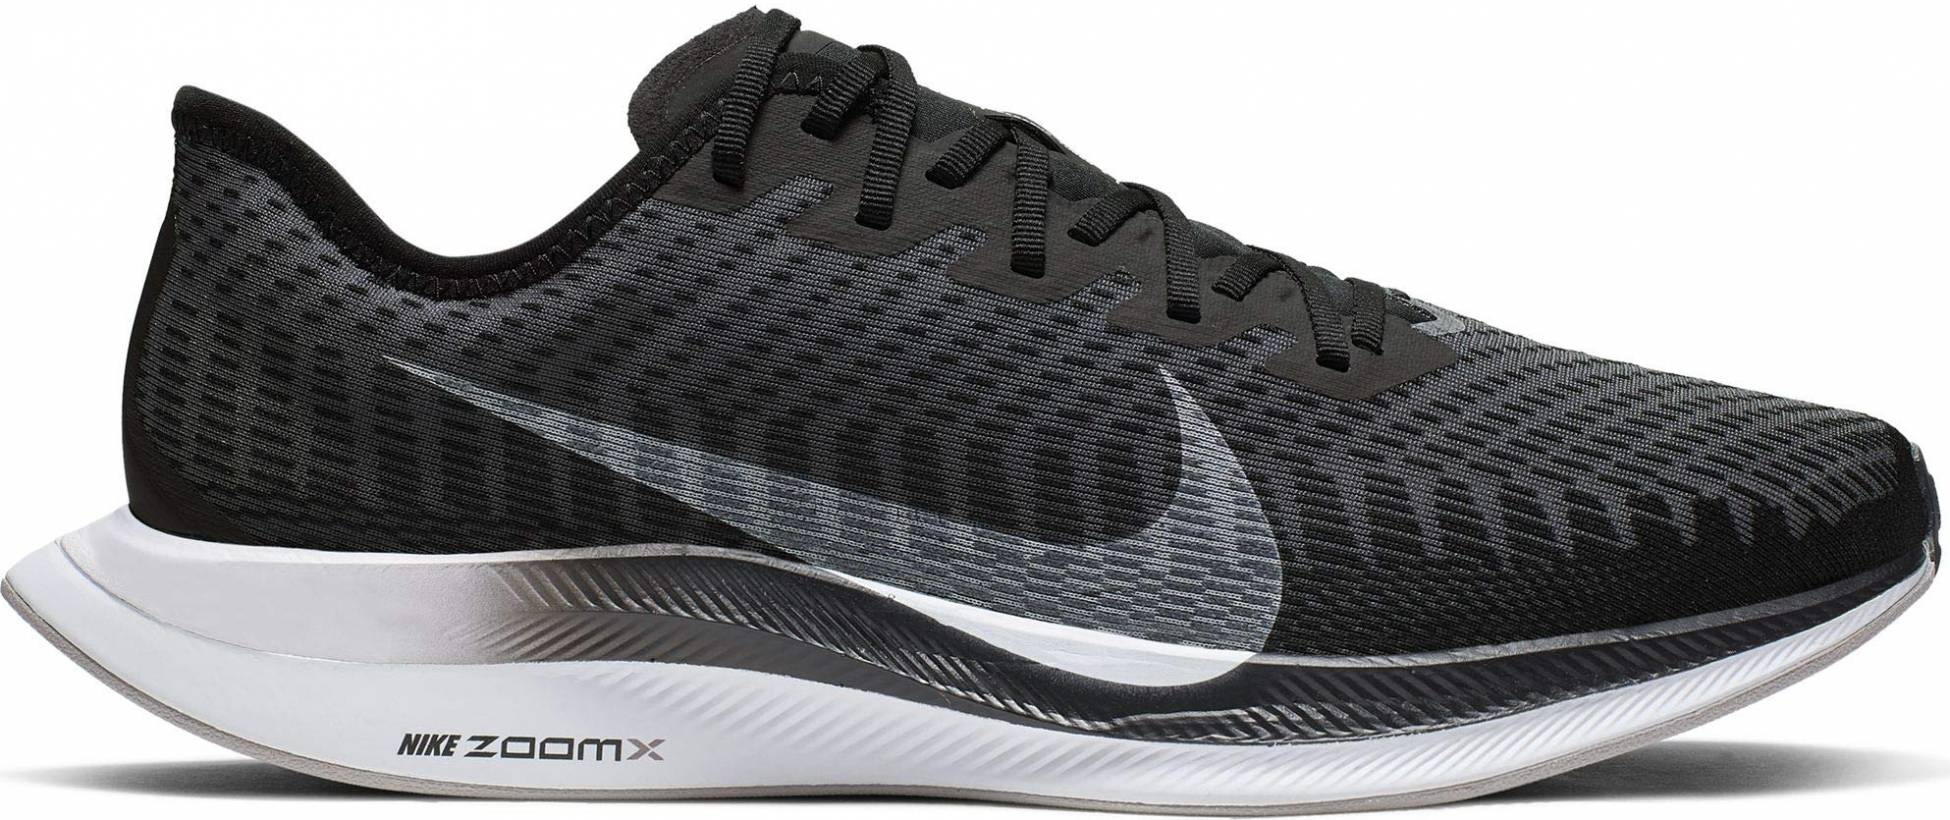 Nike Zoom Turbo Opiniones Online, SAVE 59%.